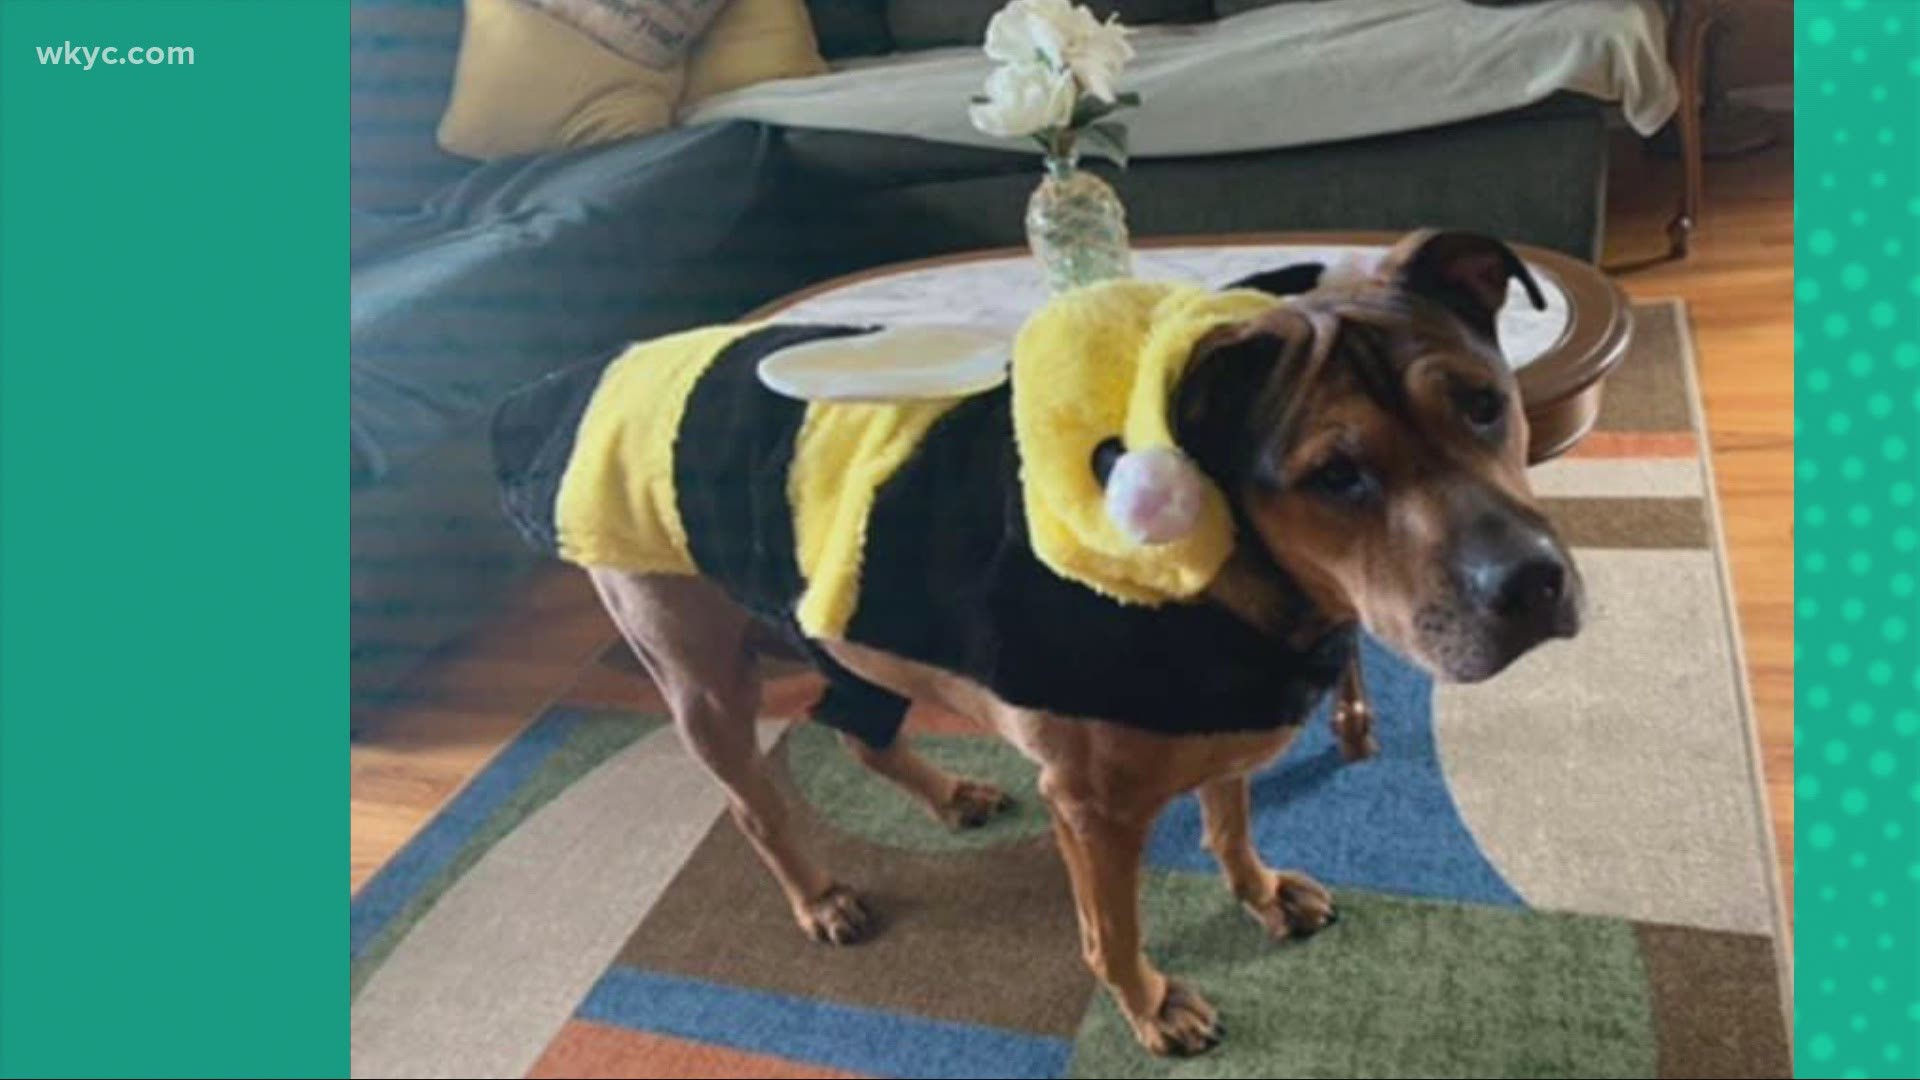 Jan. 14, 2021: So cute! Check out these pets showing off some fun costumes for Dress Up Your Pet Day.